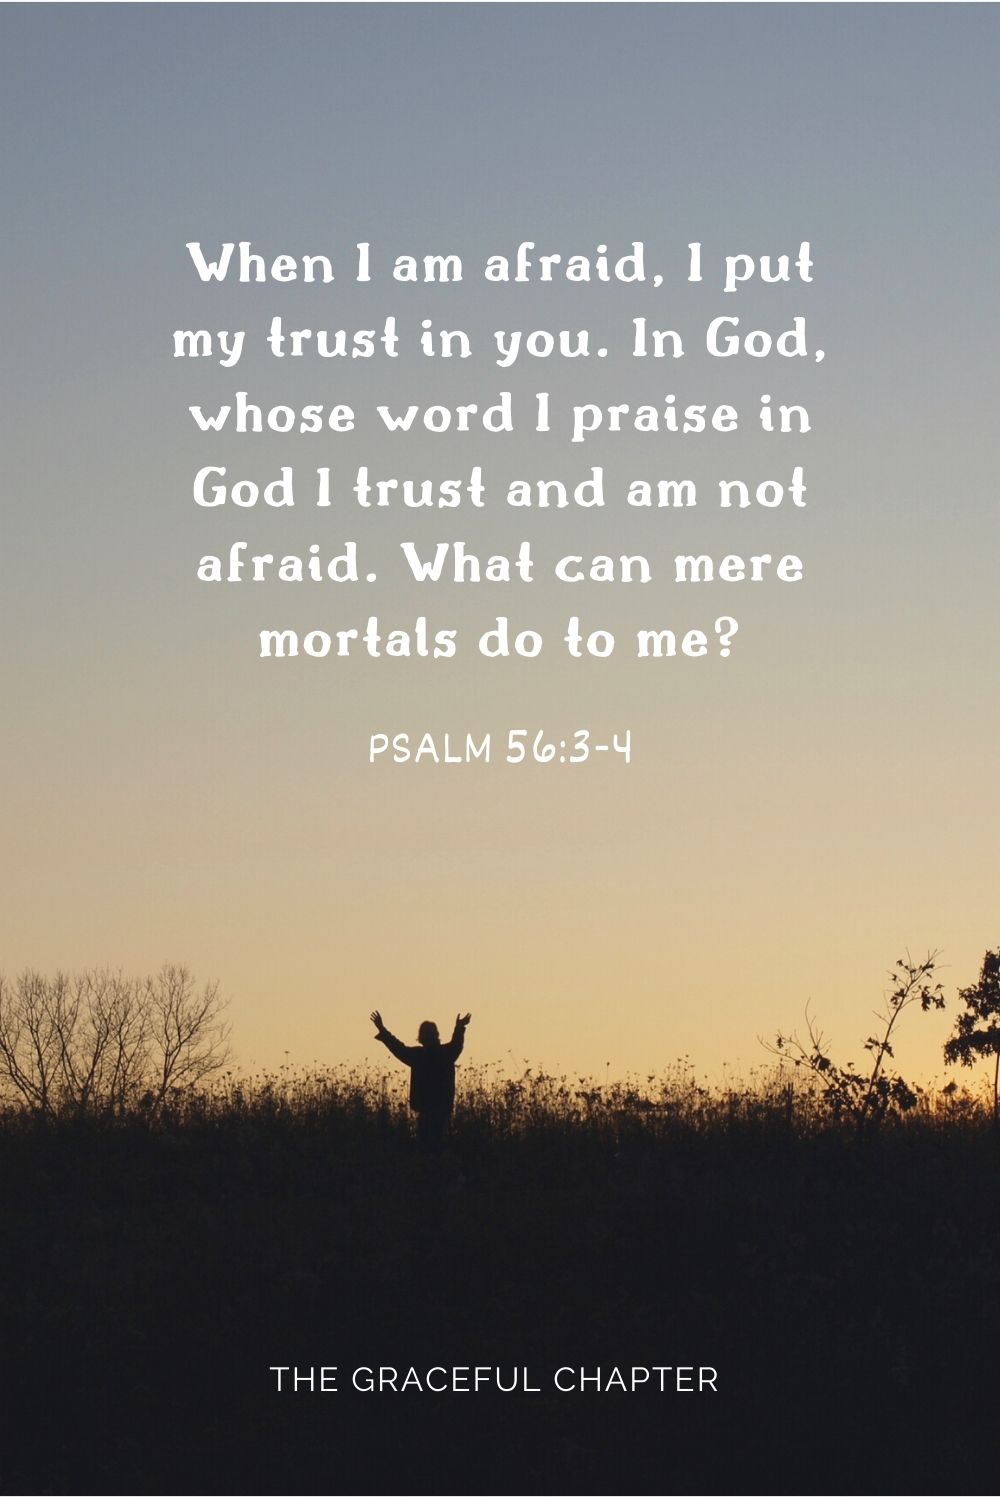 When I am afraid, I put my trust in you.  In God, whose word I praise in God I trust and am not afraid. What can mere mortals do to me? Psalm 56:3-4